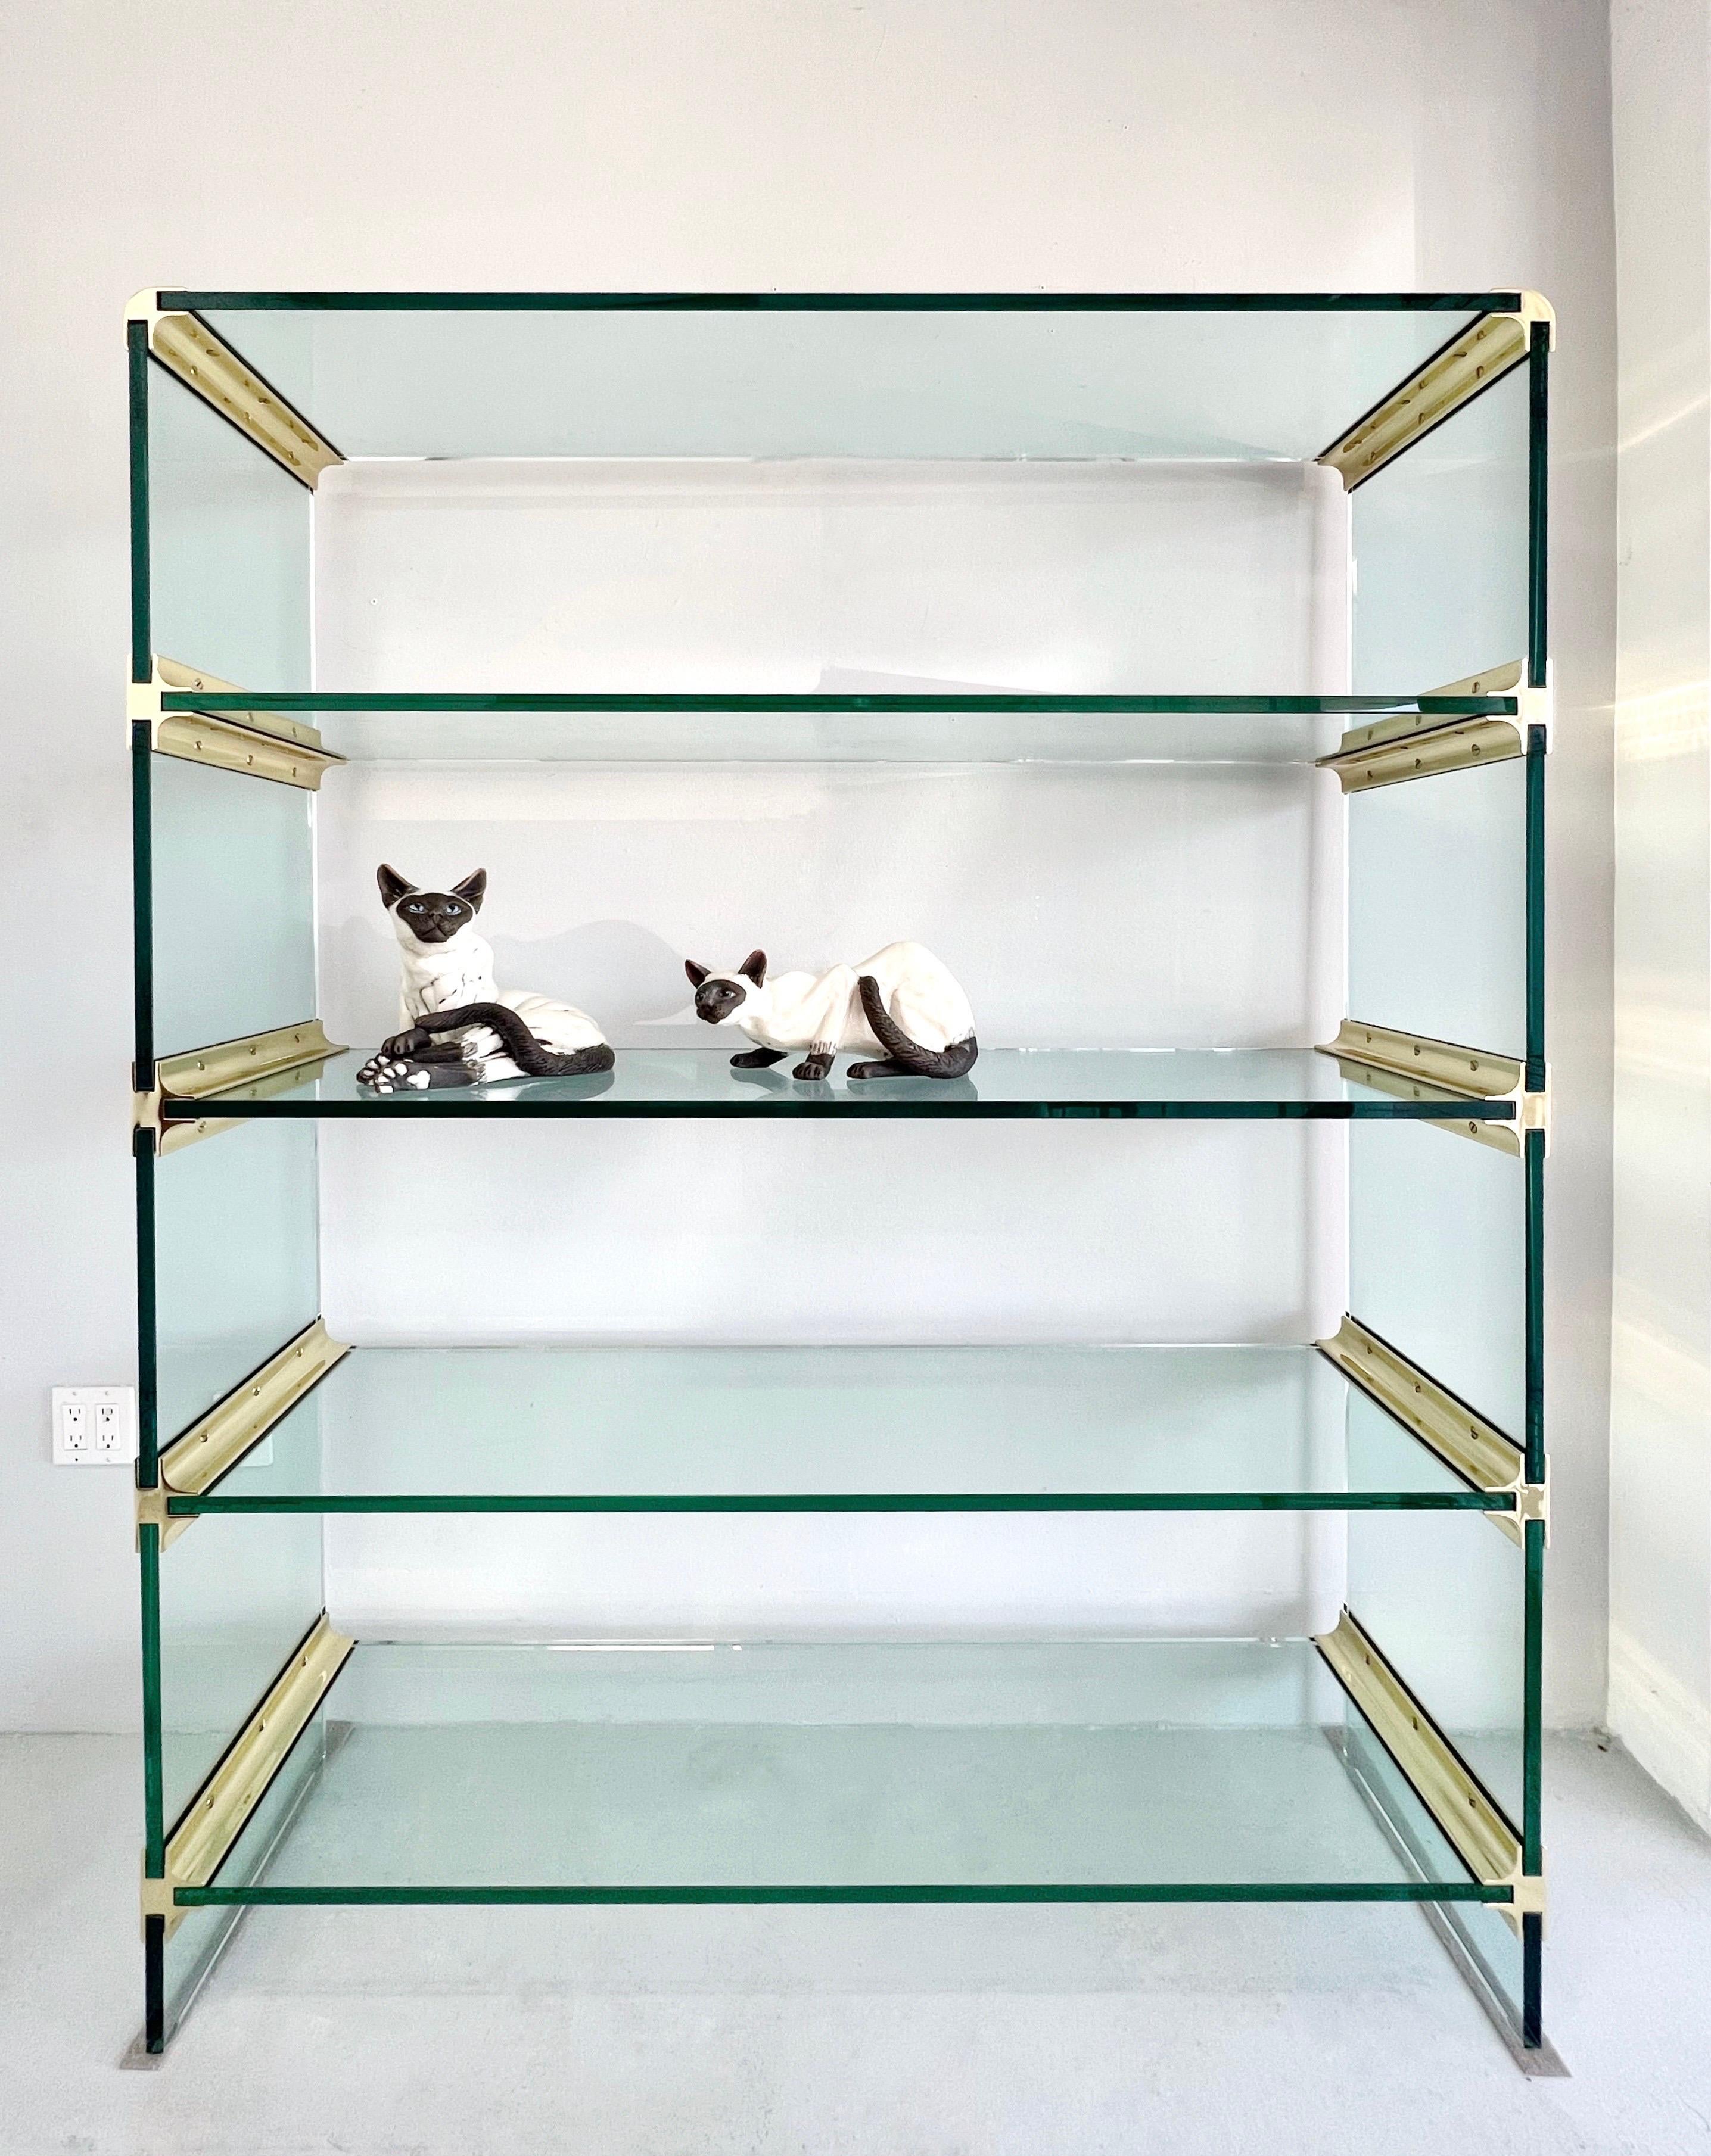 A large glass bookcase or etagere. The glass is 3/4